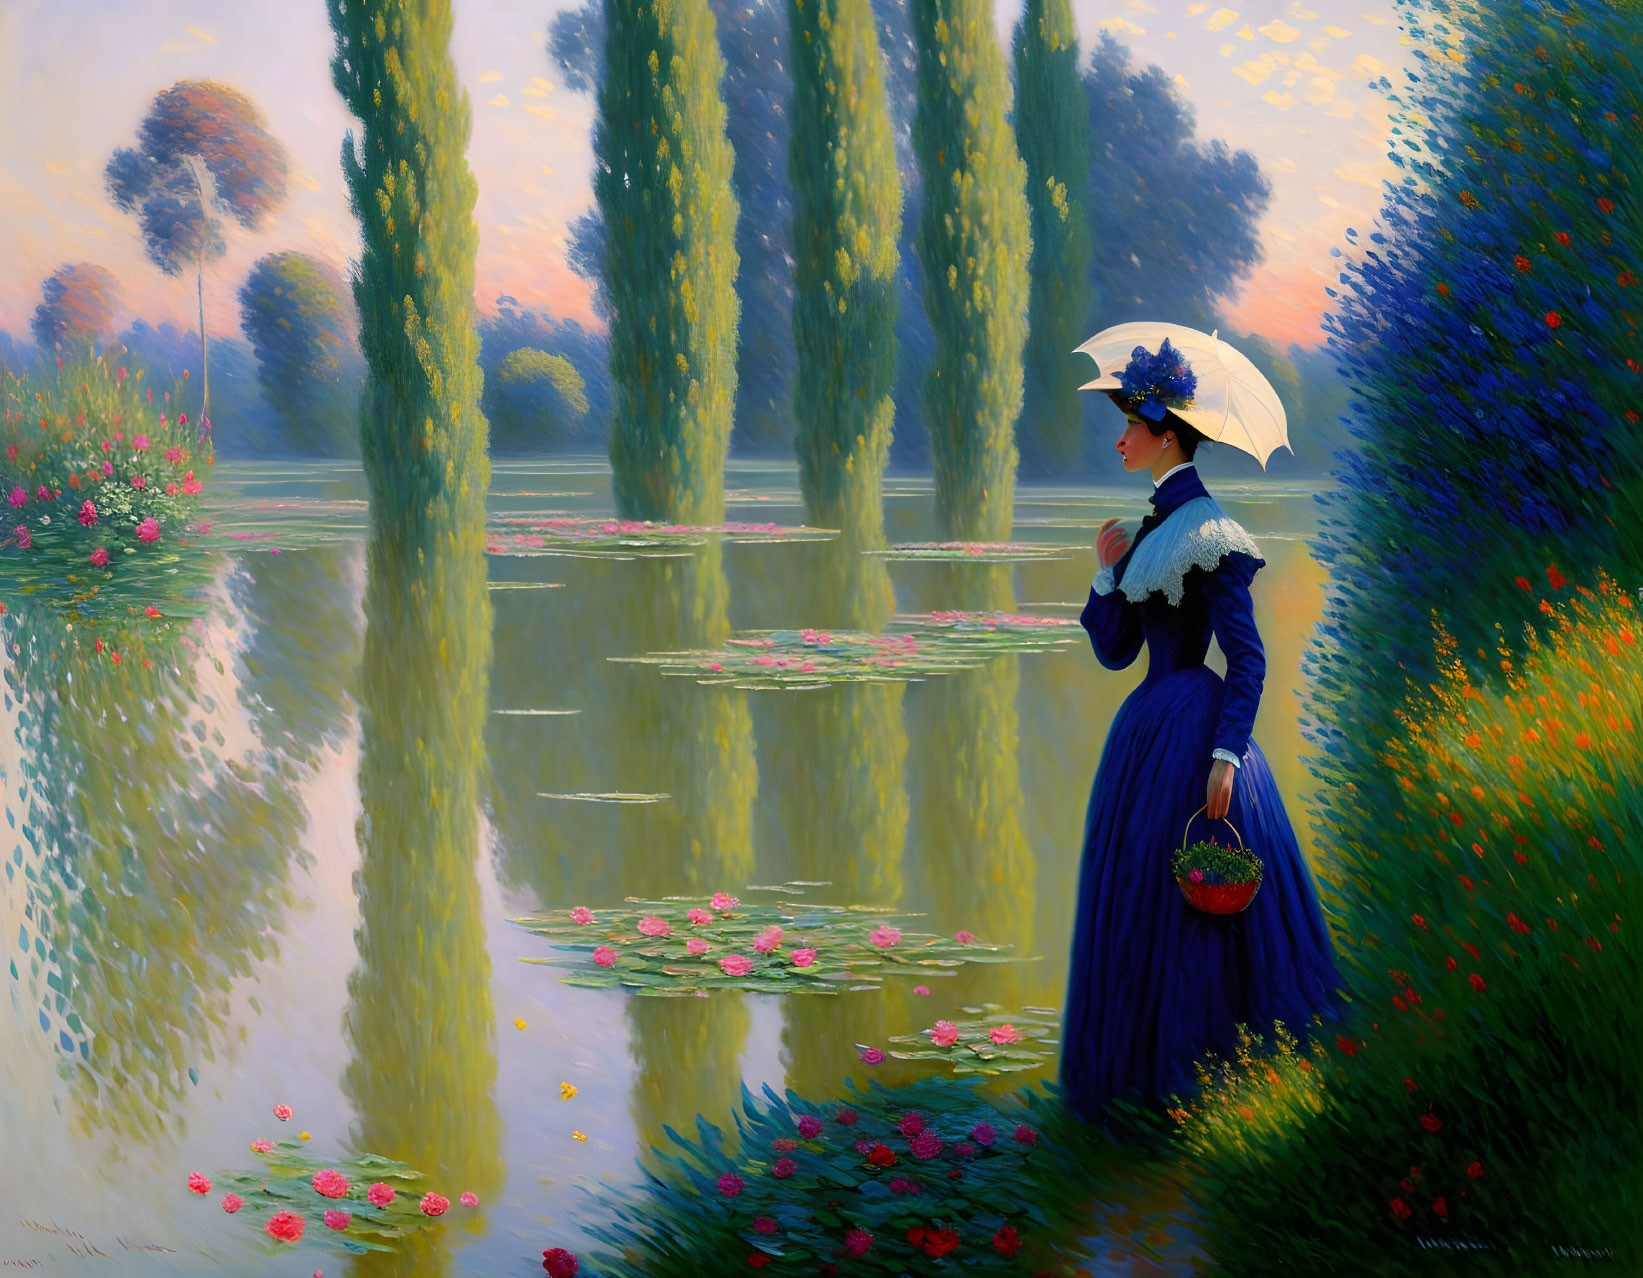 Woman in blue dress and white hat by reflective pond in serene landscape